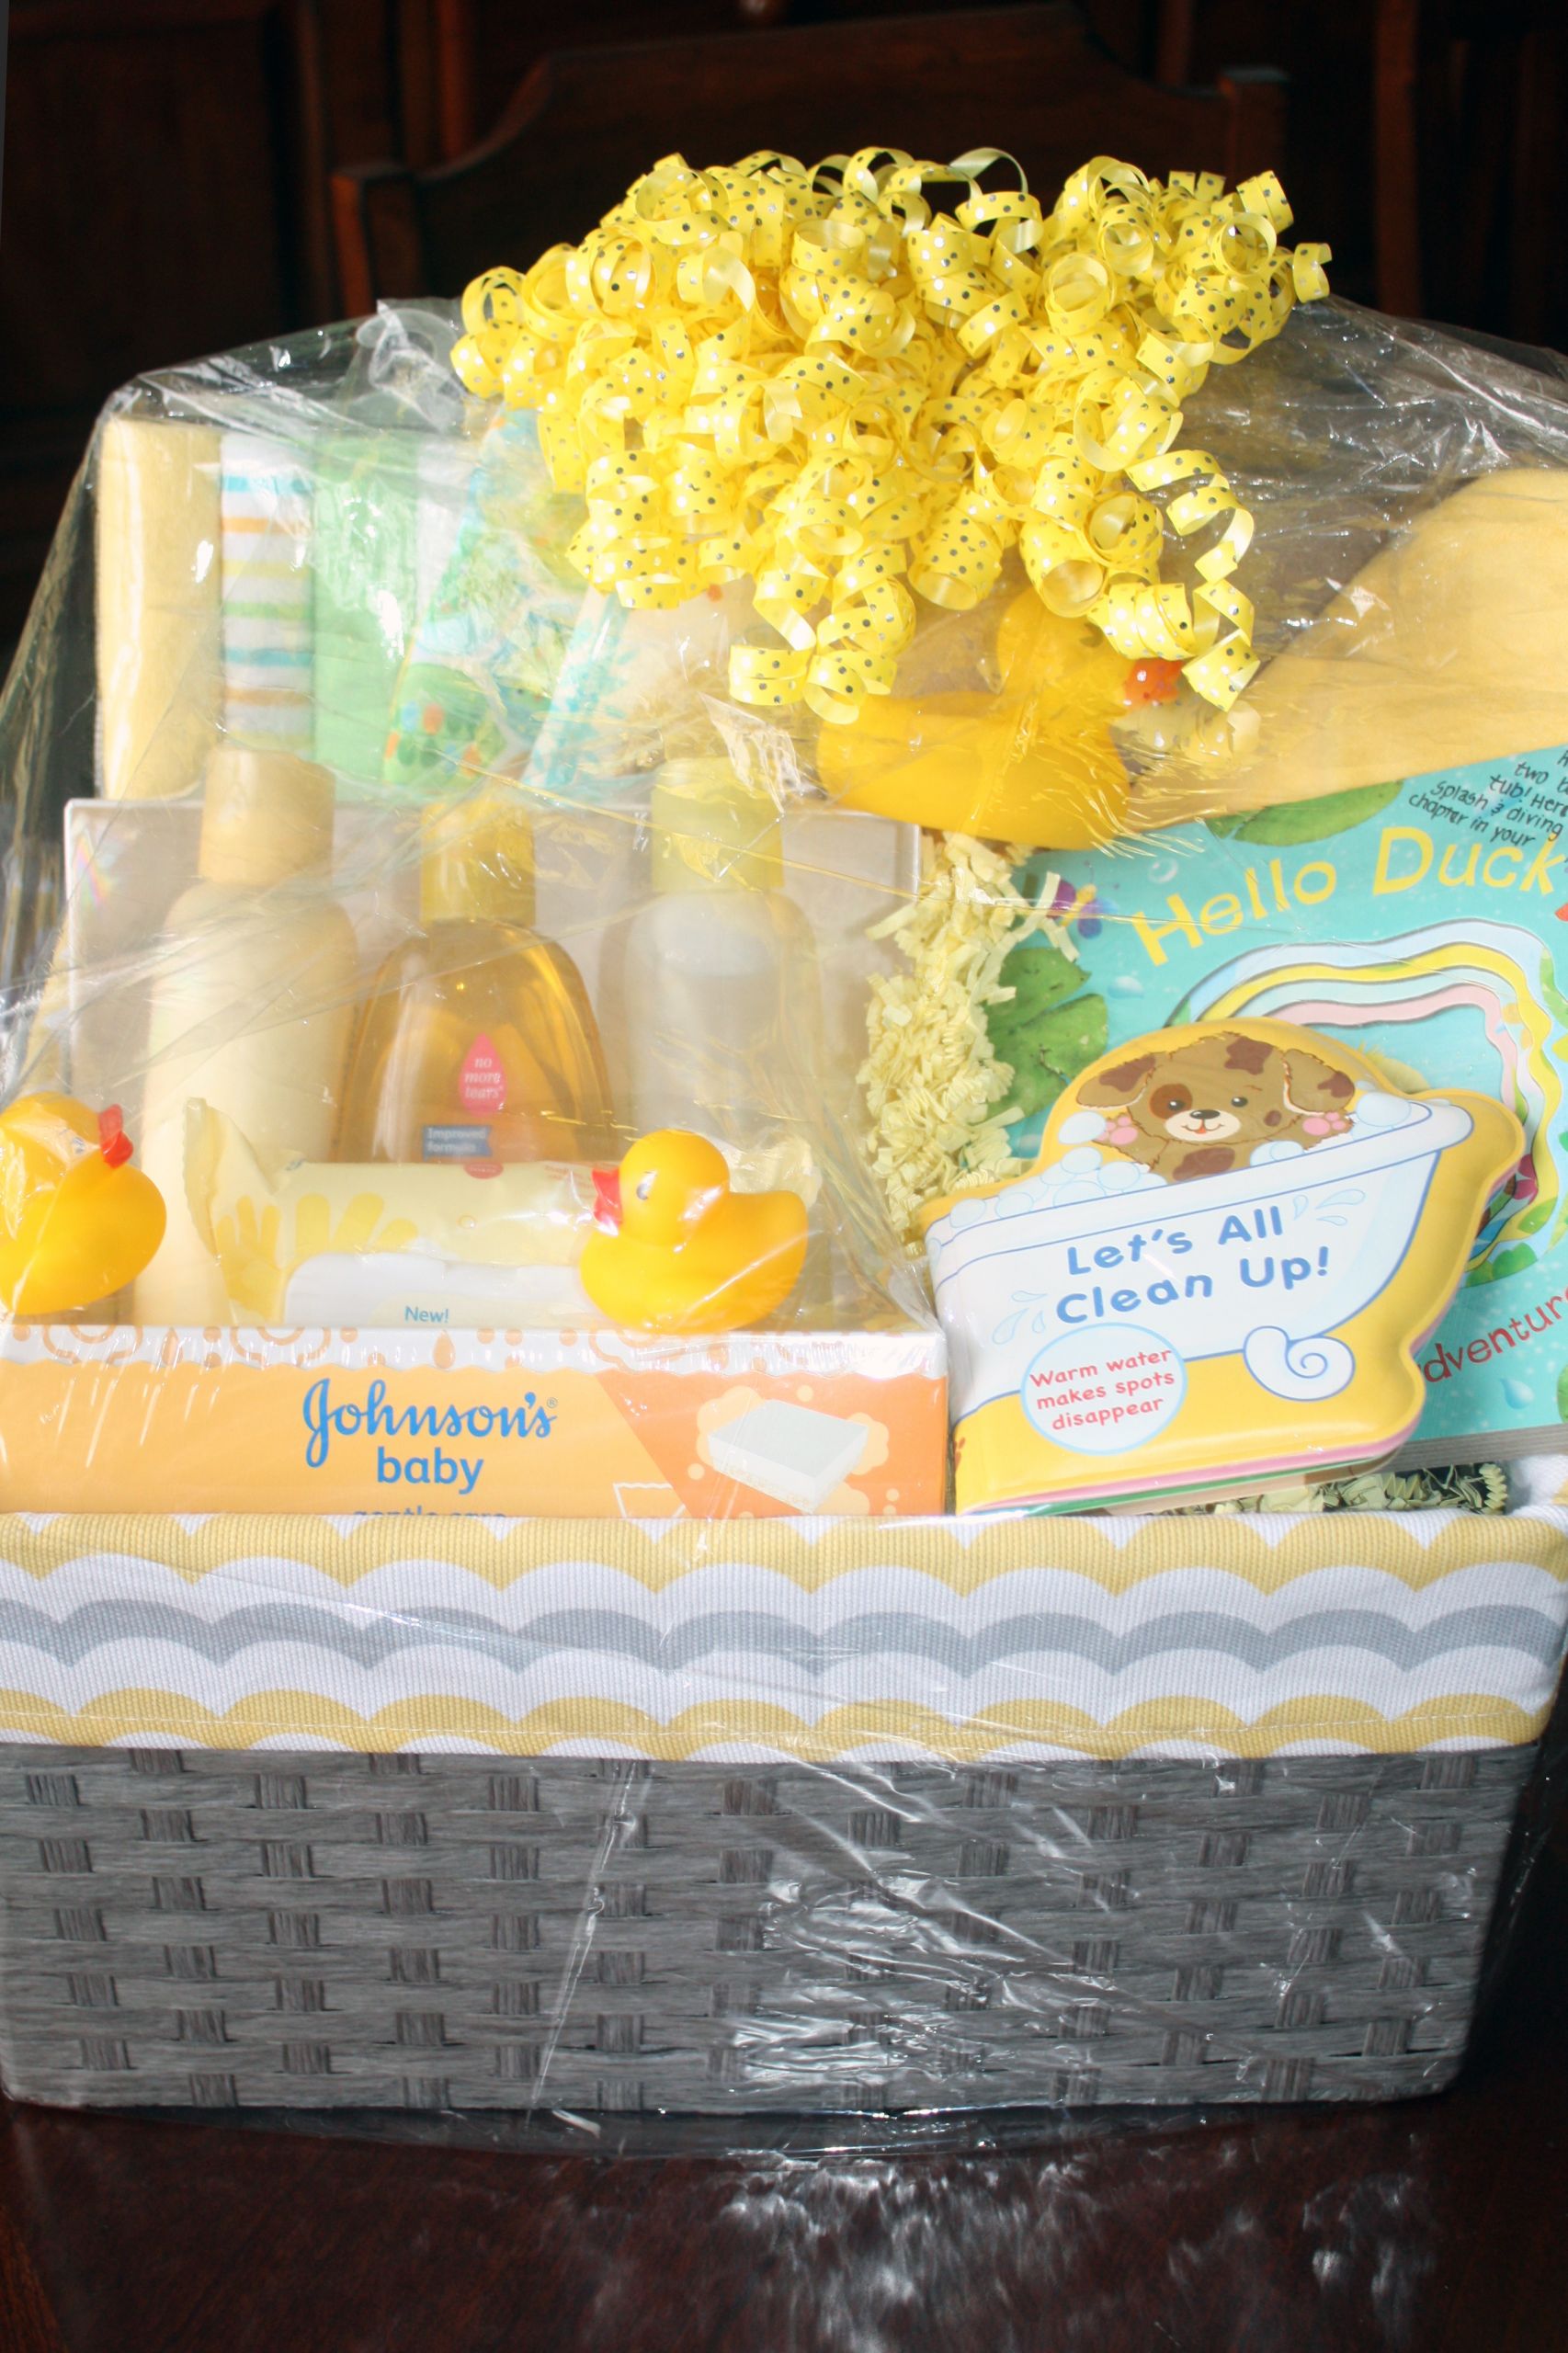 Ideas For Baby Shower Gift Baskets
 Get Creative Baby Shower Gift Basket Ideas